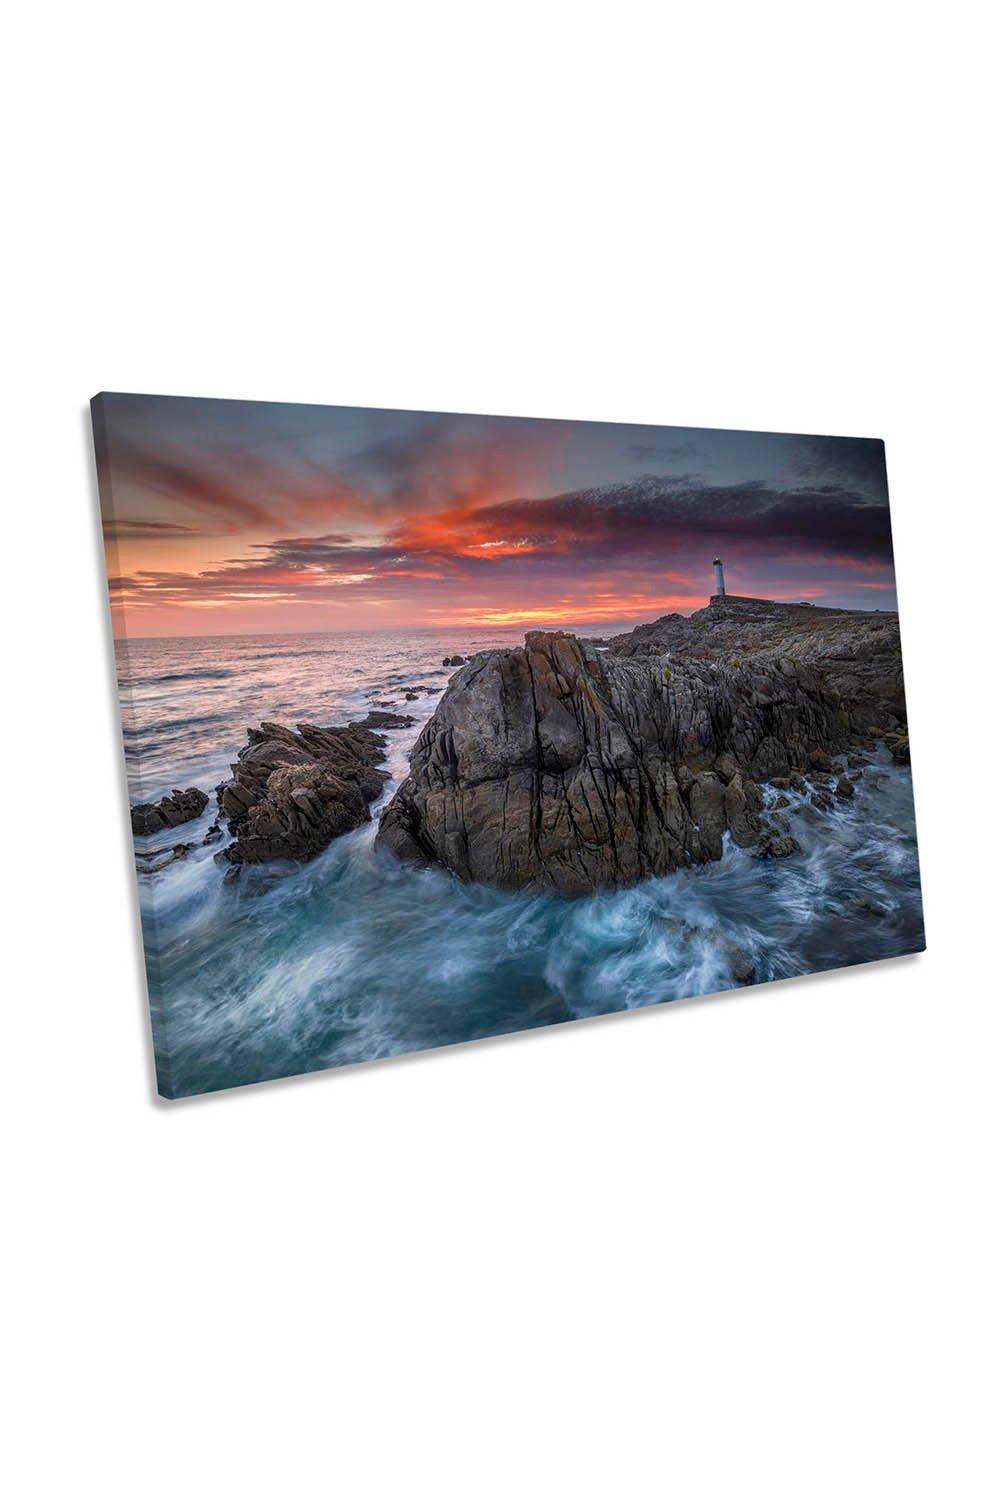 O Roncudo Lighthouse Sunset Coast Canvas Wall Art Picture Print